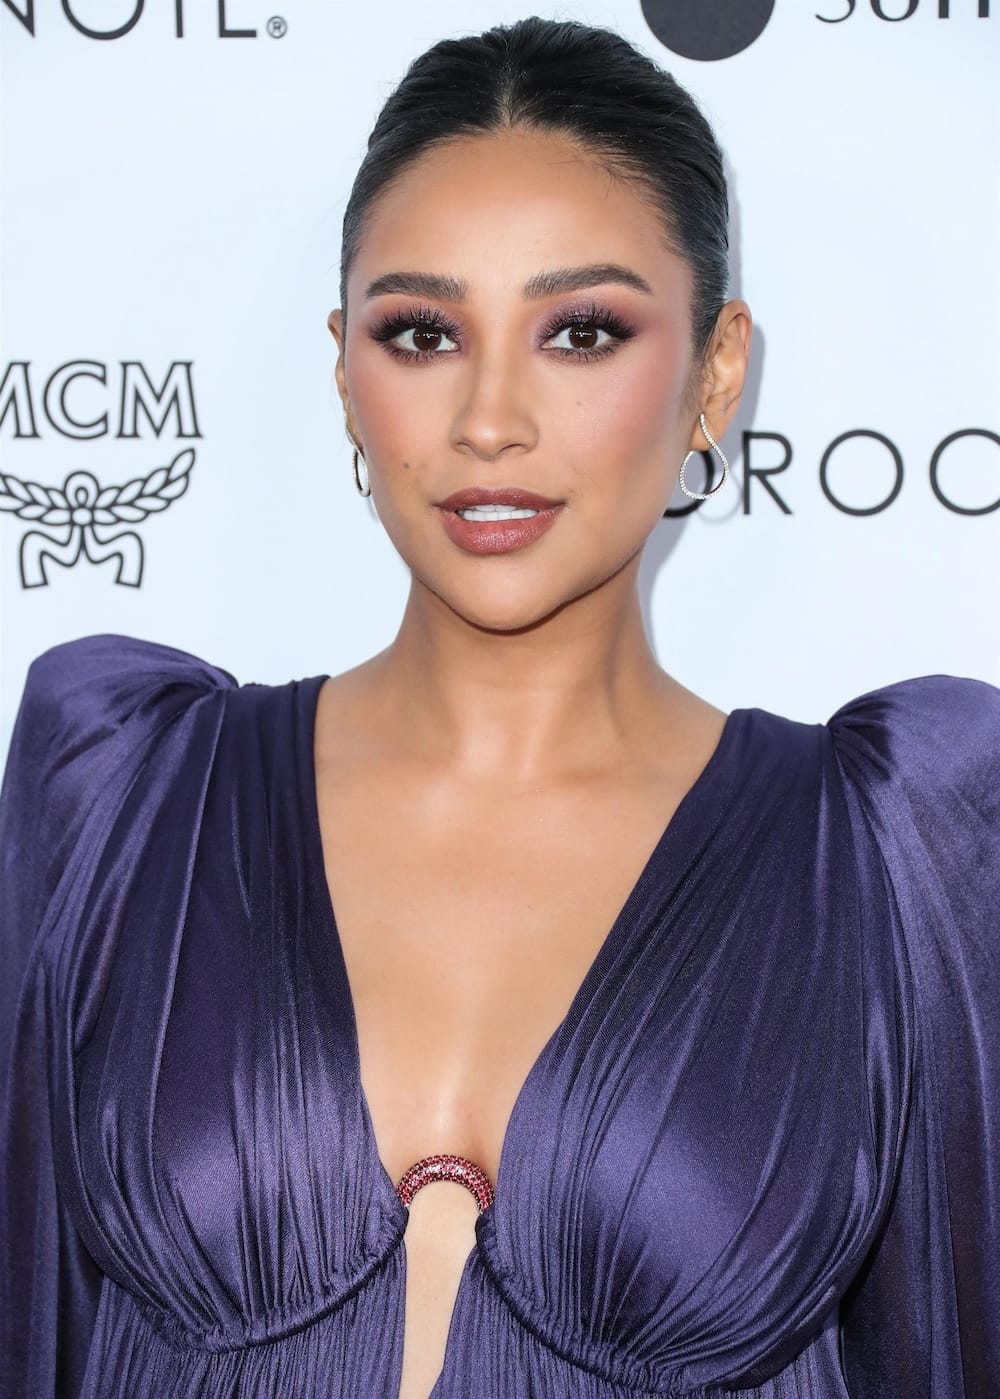 Pregnant Shay Mitchell in Lanvin Dress at 2022 Daily Front Row Fashion Awards